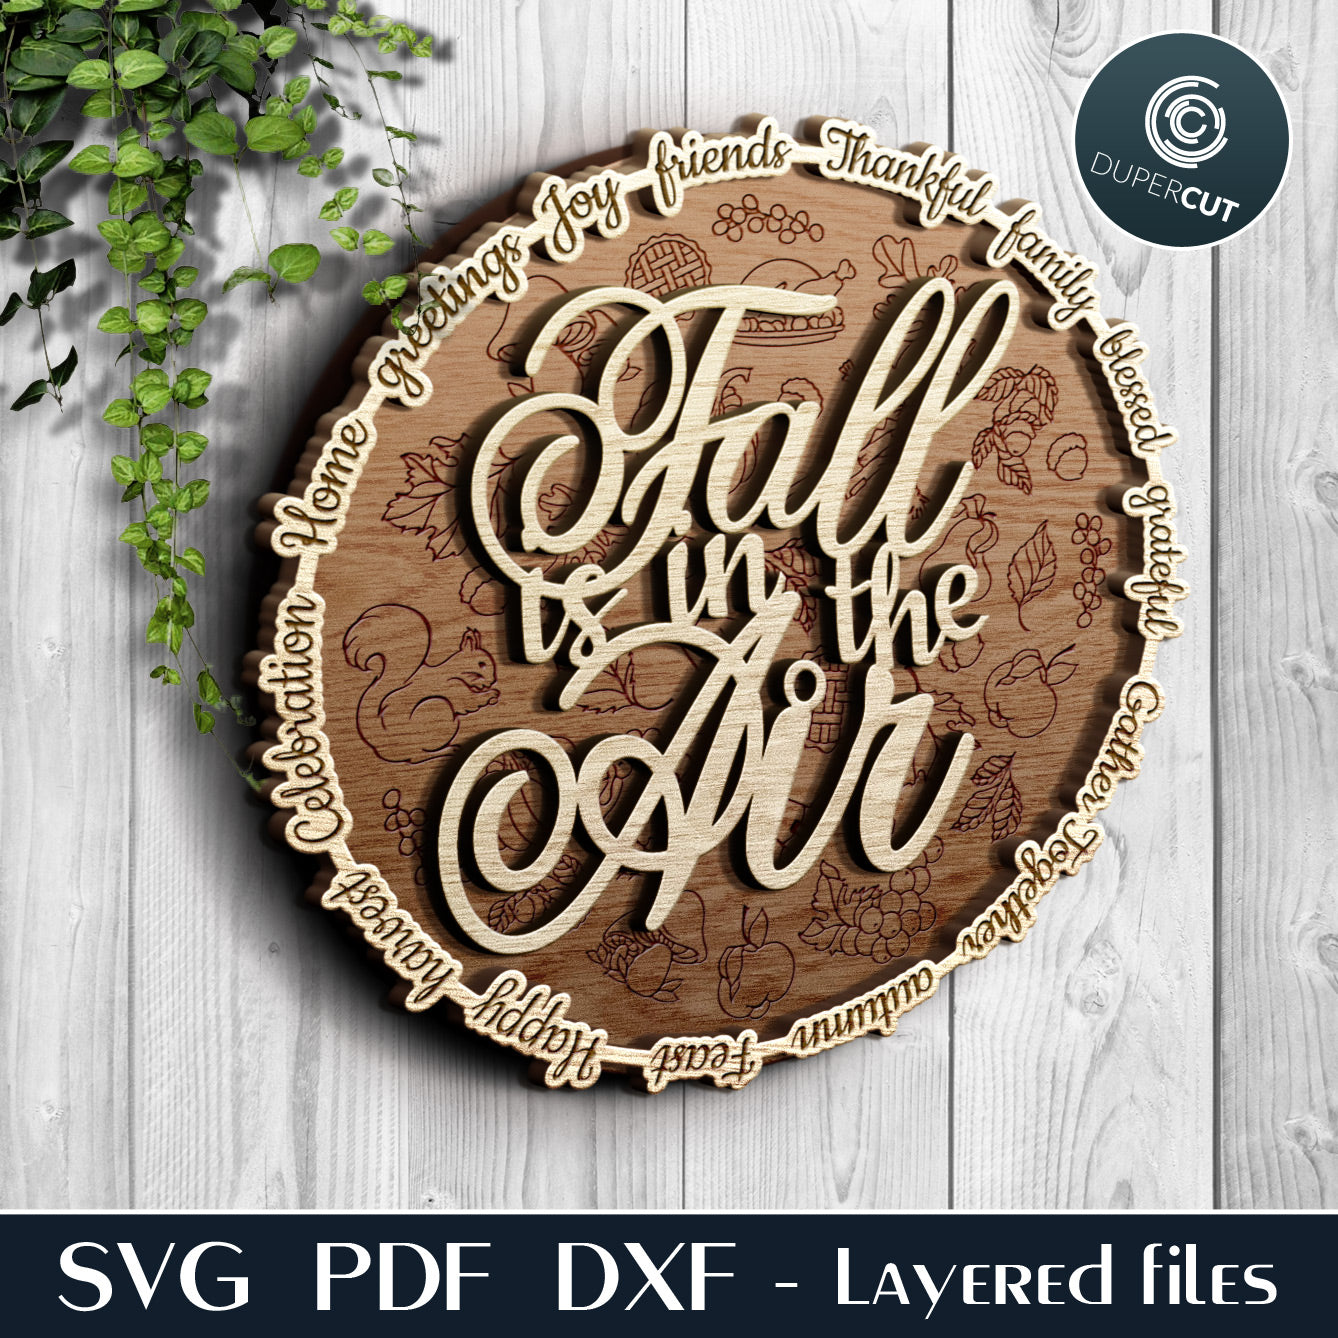 Fall celebration phrases layered round with engraved doodles - SVG PDF DXF files for Glowforge, Cricut, Silhouette cameo, CNC plasma machines